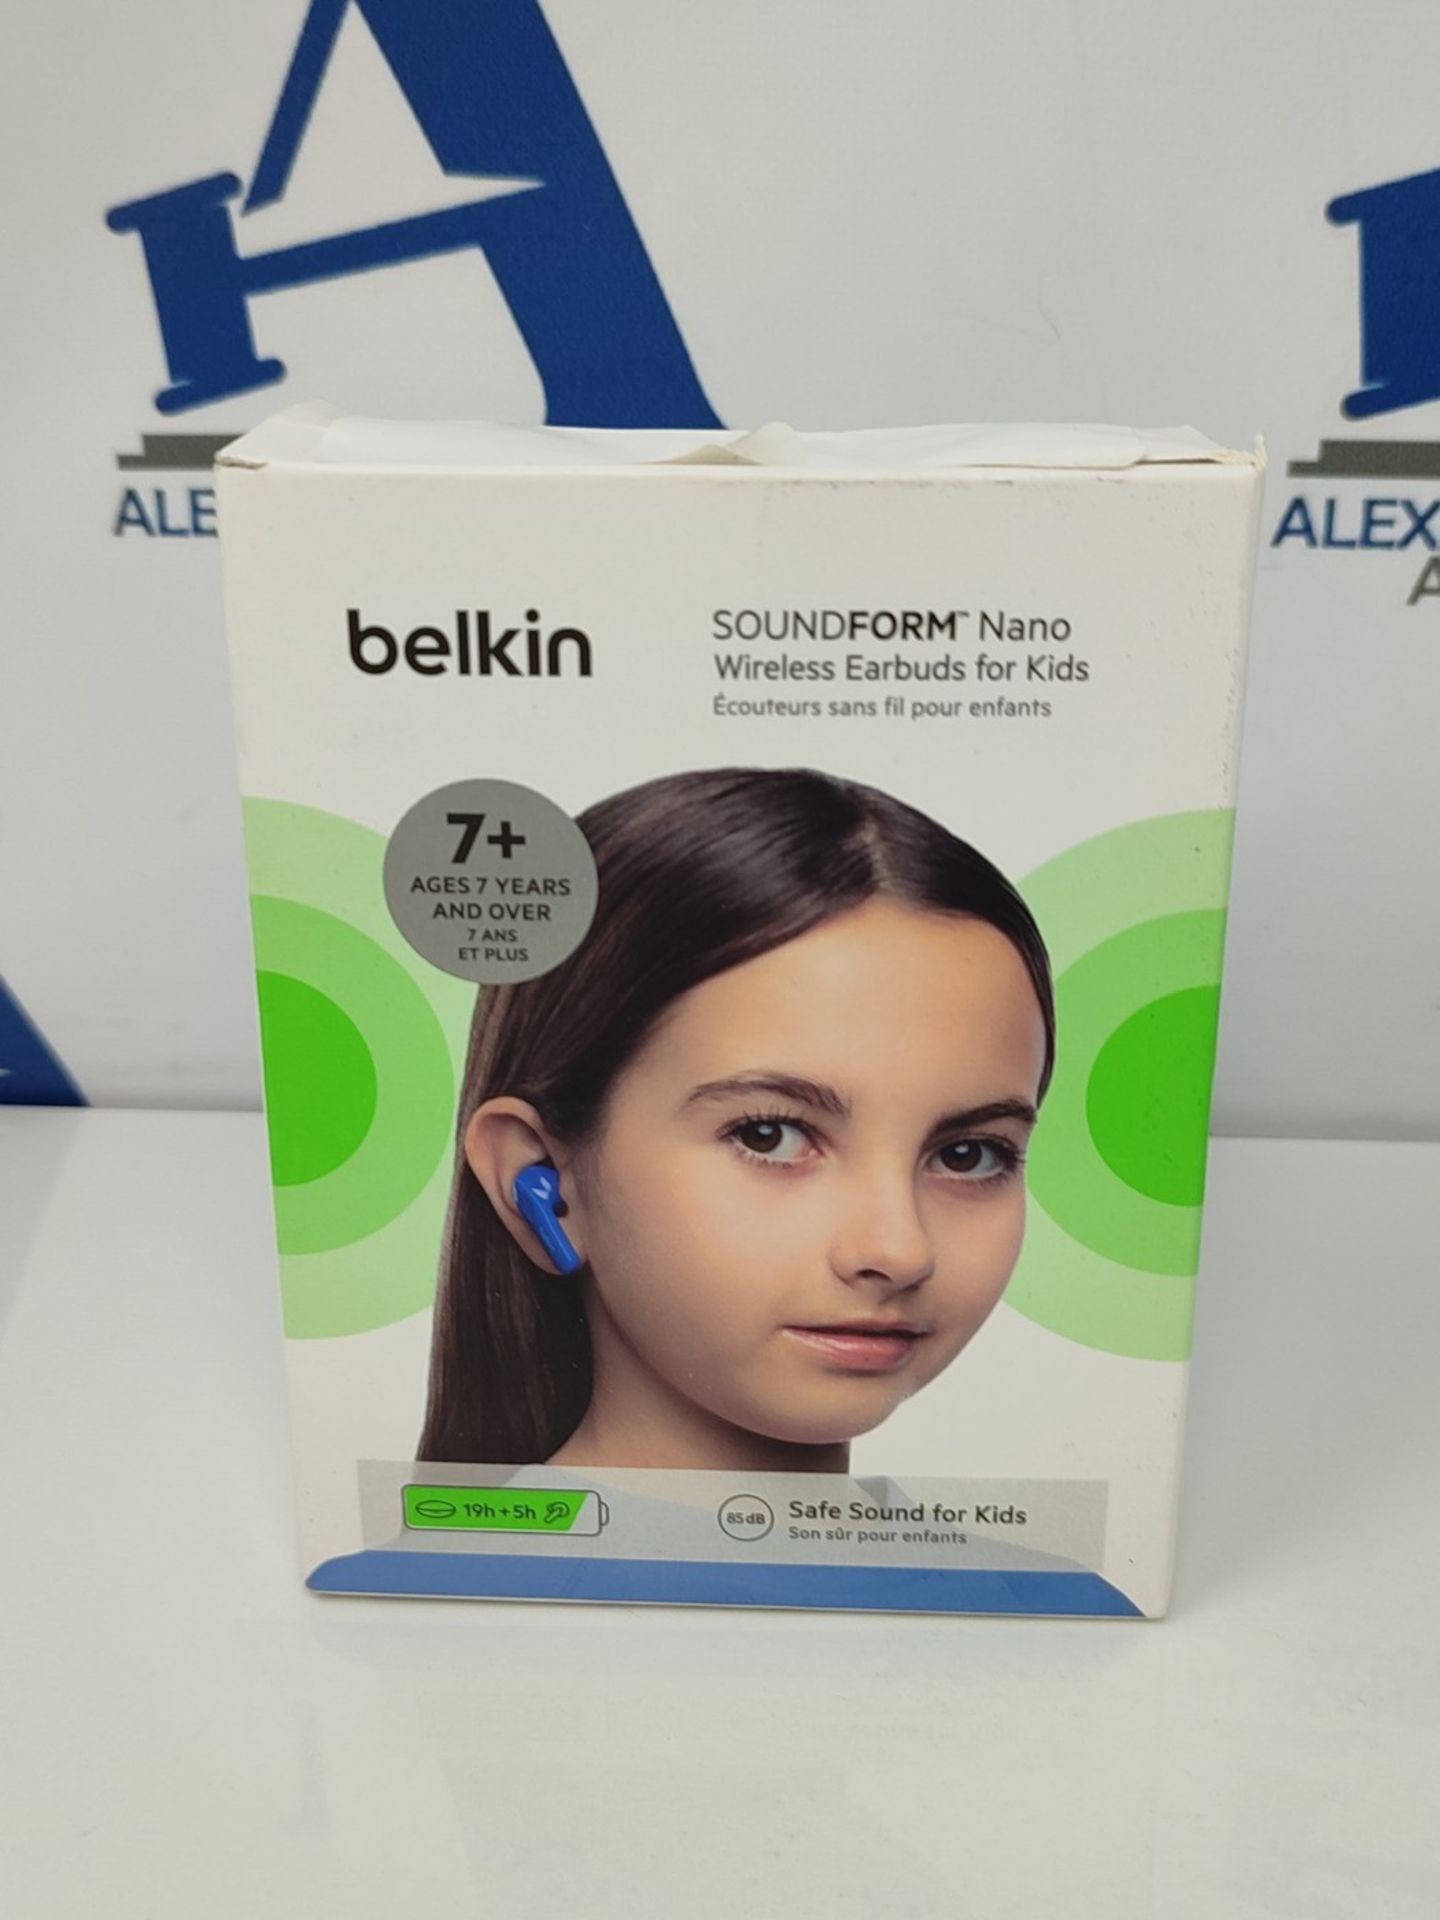 Belkin SOUNDFORM Nano, True Wireless Earbuds for Kids, 85dB Limit for Ear Protection, - Image 2 of 3